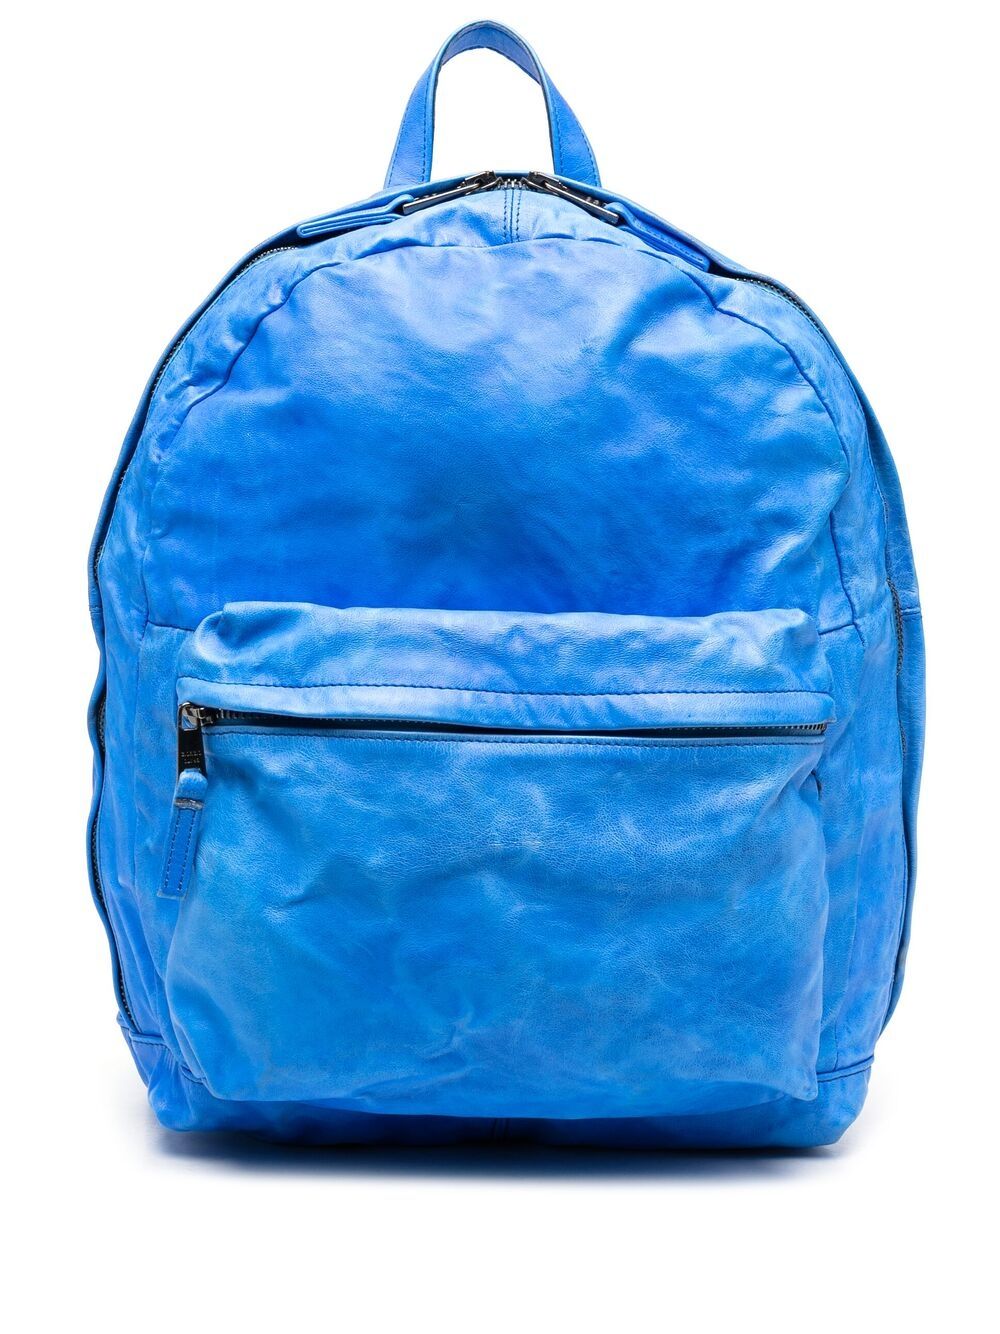 Giorgio Brato Brushed Calf-leather Backpack In Blue